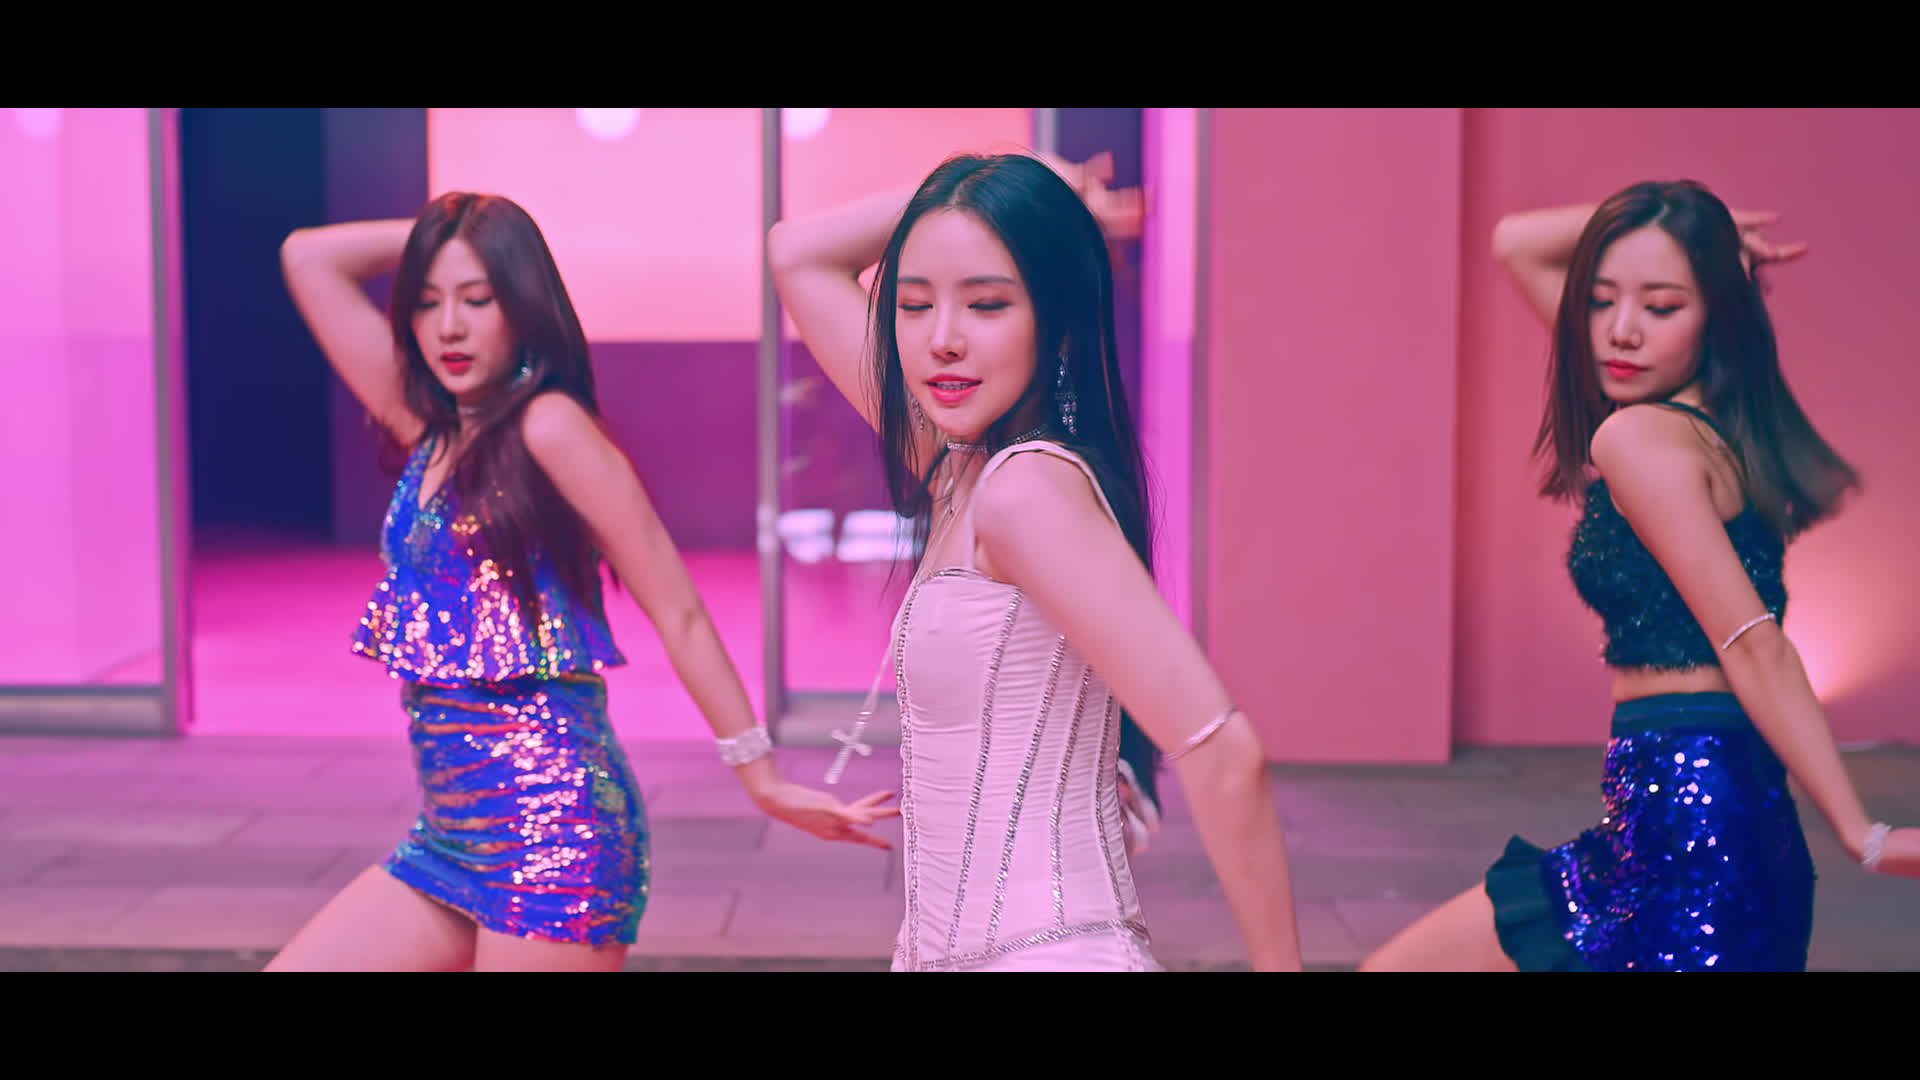 Apink 에이핑크 %%(응응) Music Video Official